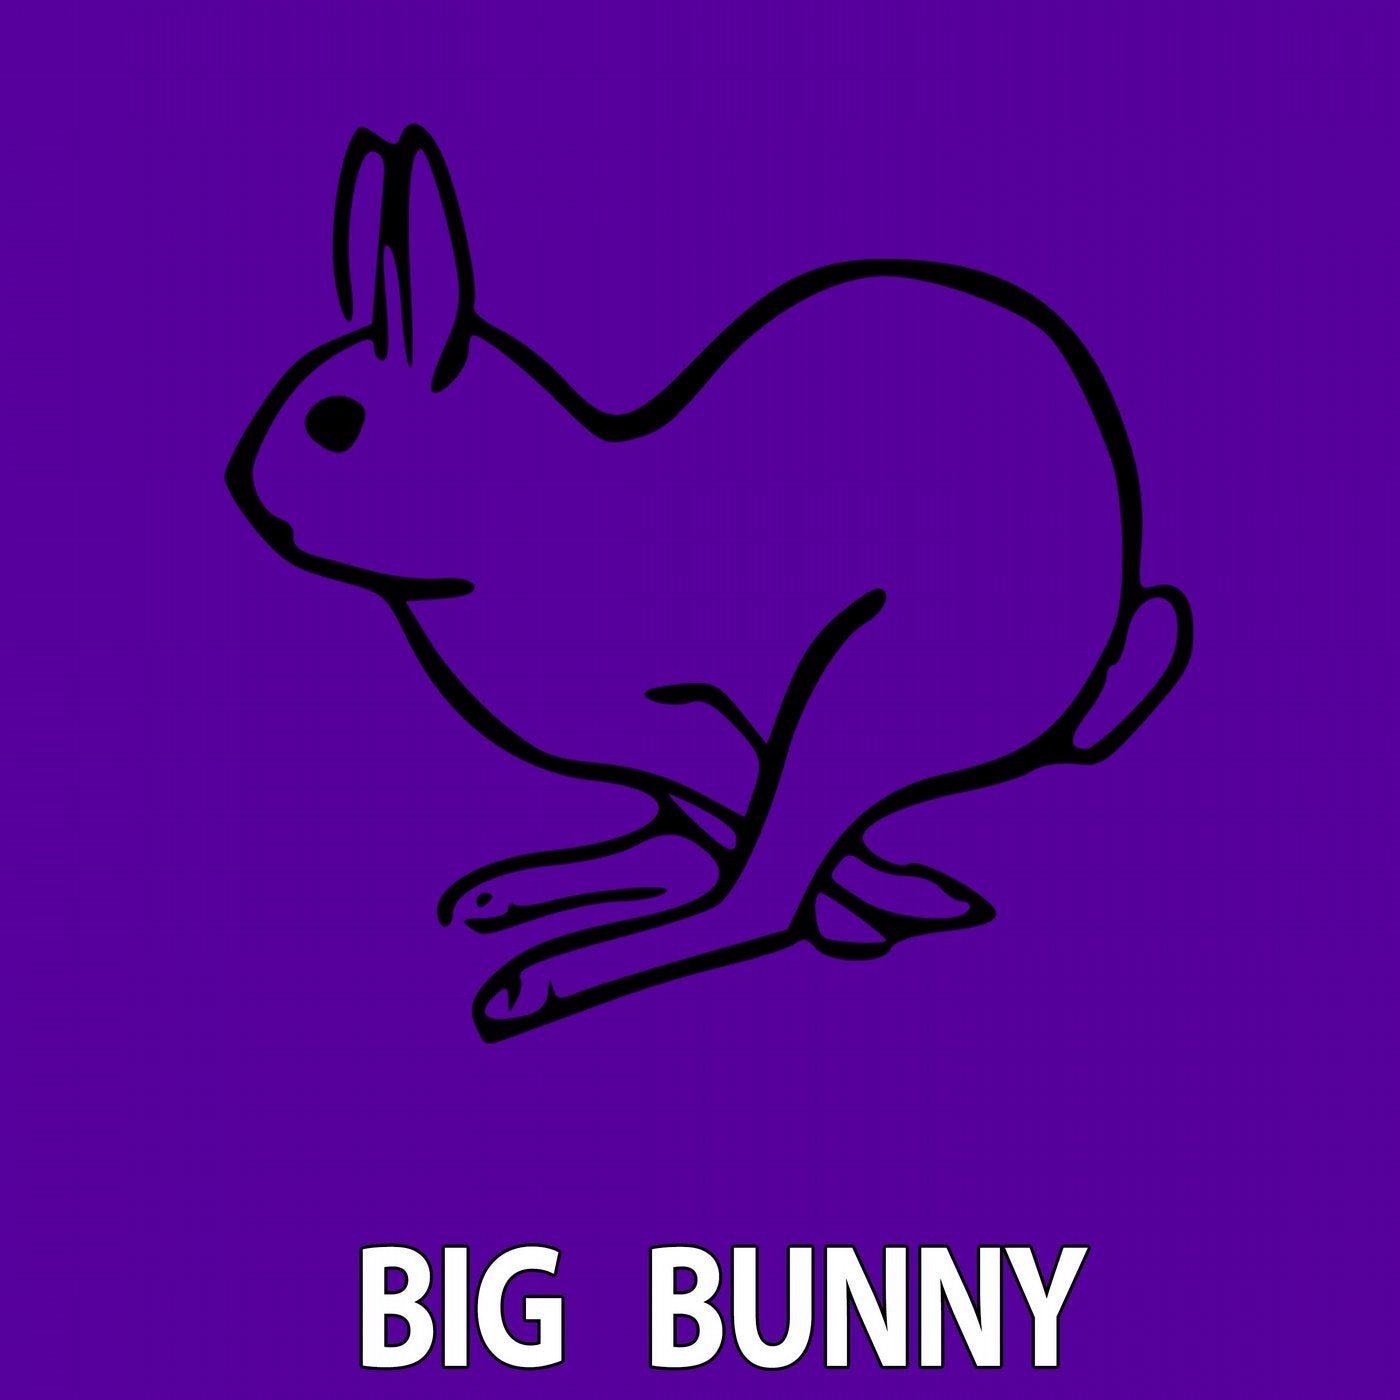 Only bunny